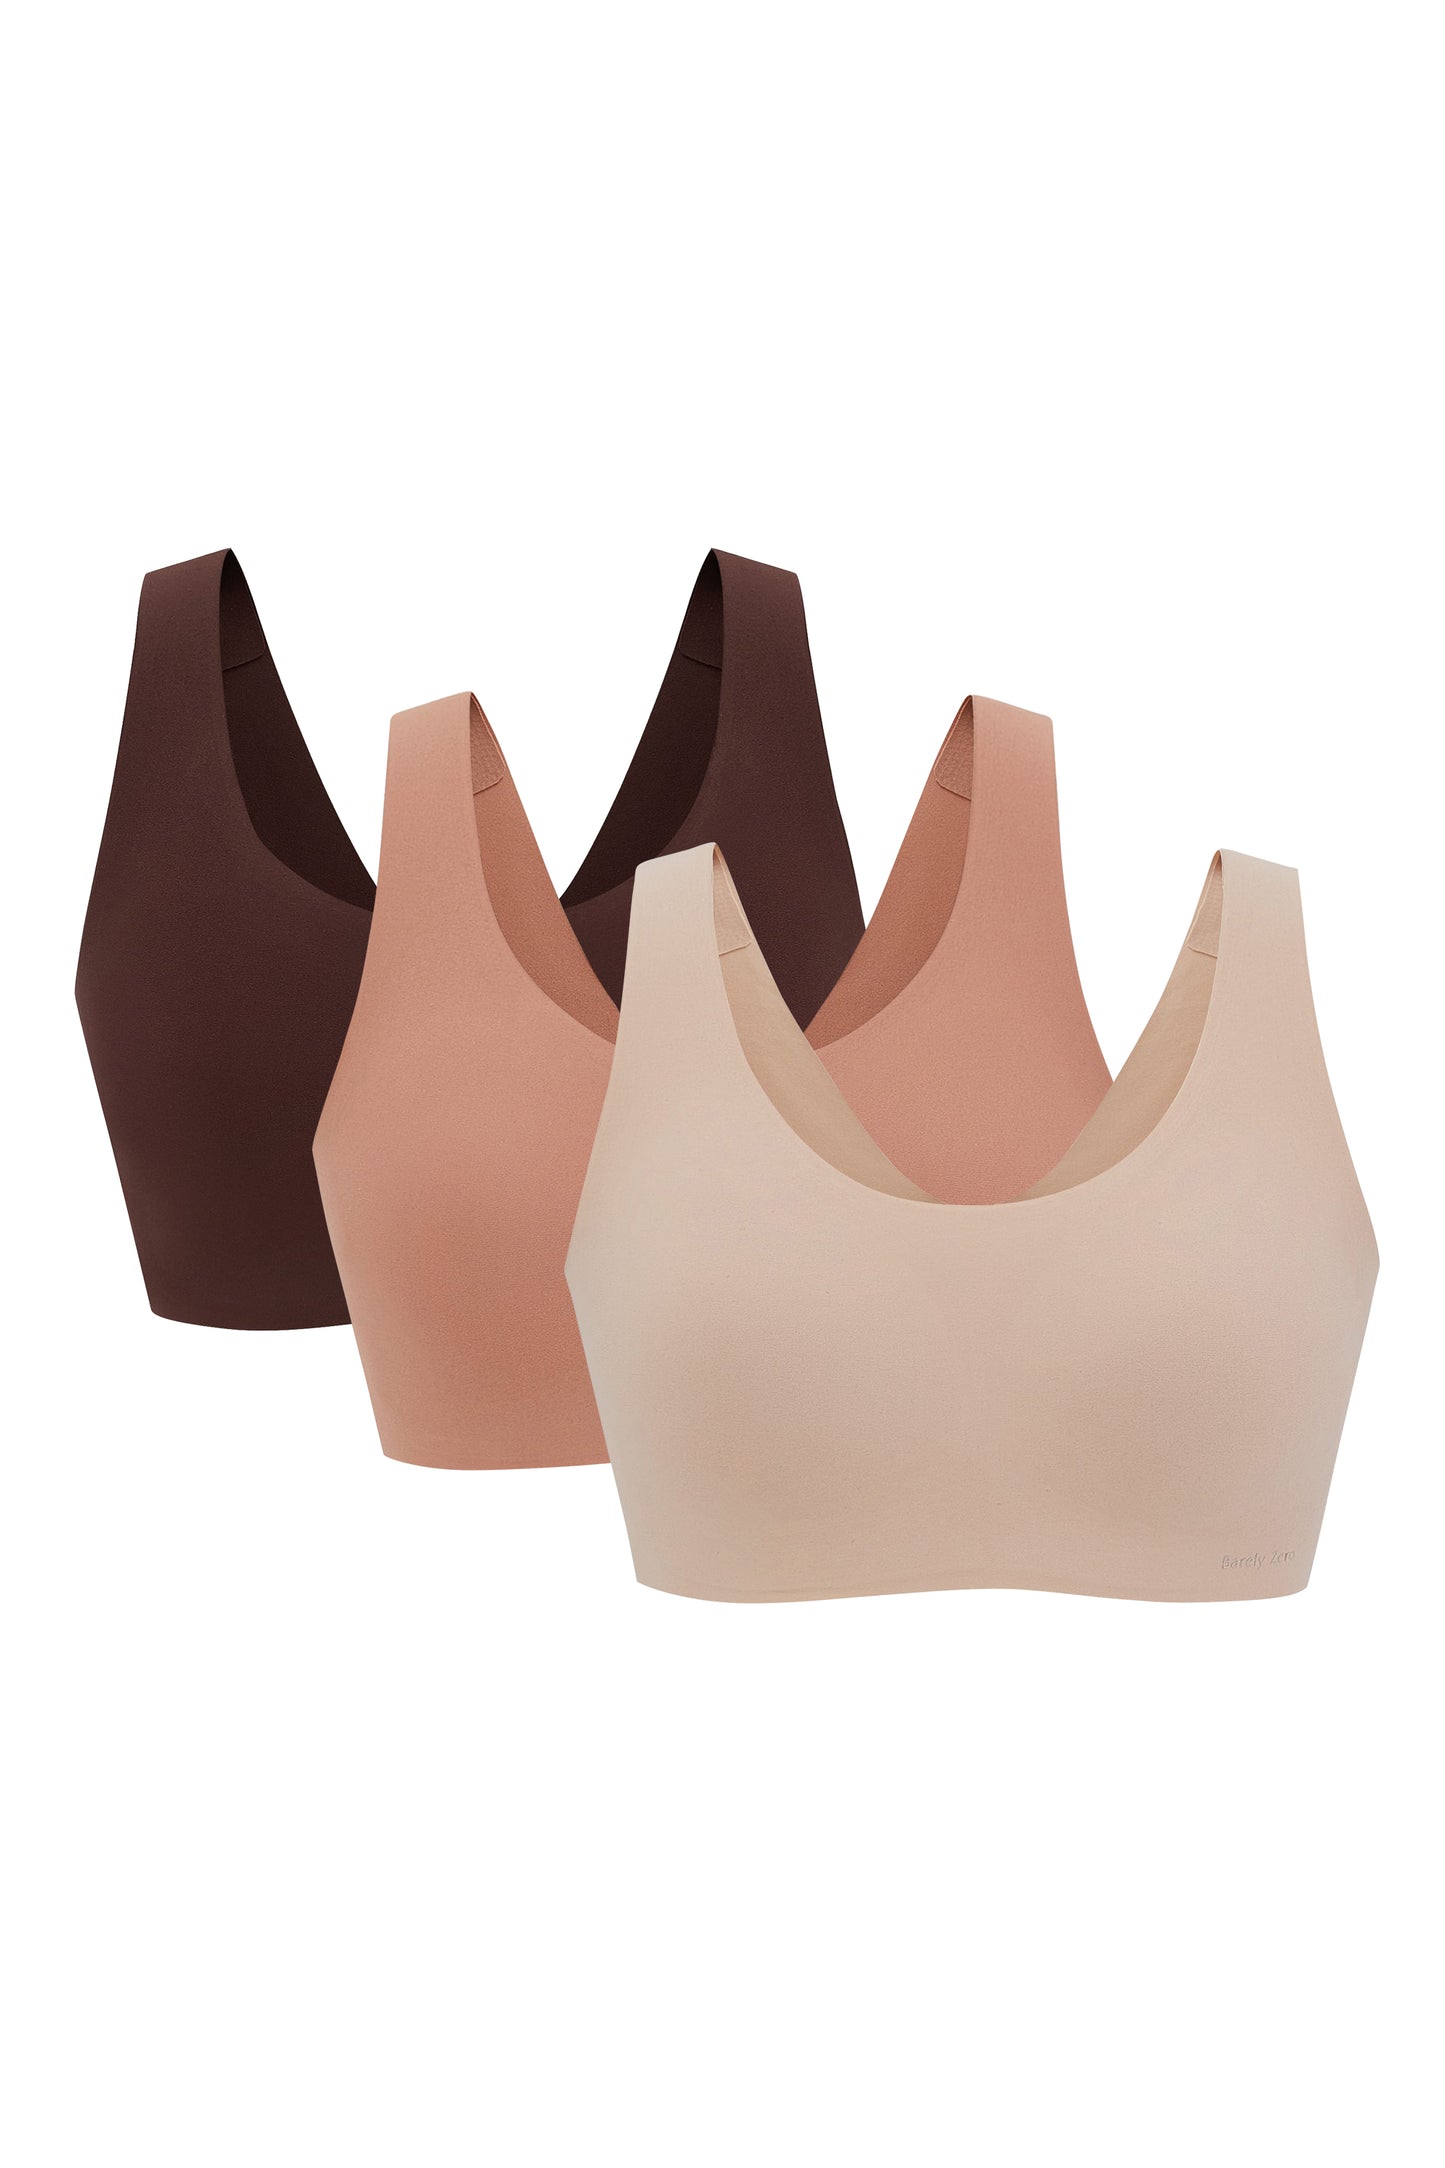 Three Barely Zero Classic Bra Trios in gradient shades of brown, arranged from dark to light, displayed on a neutral background.